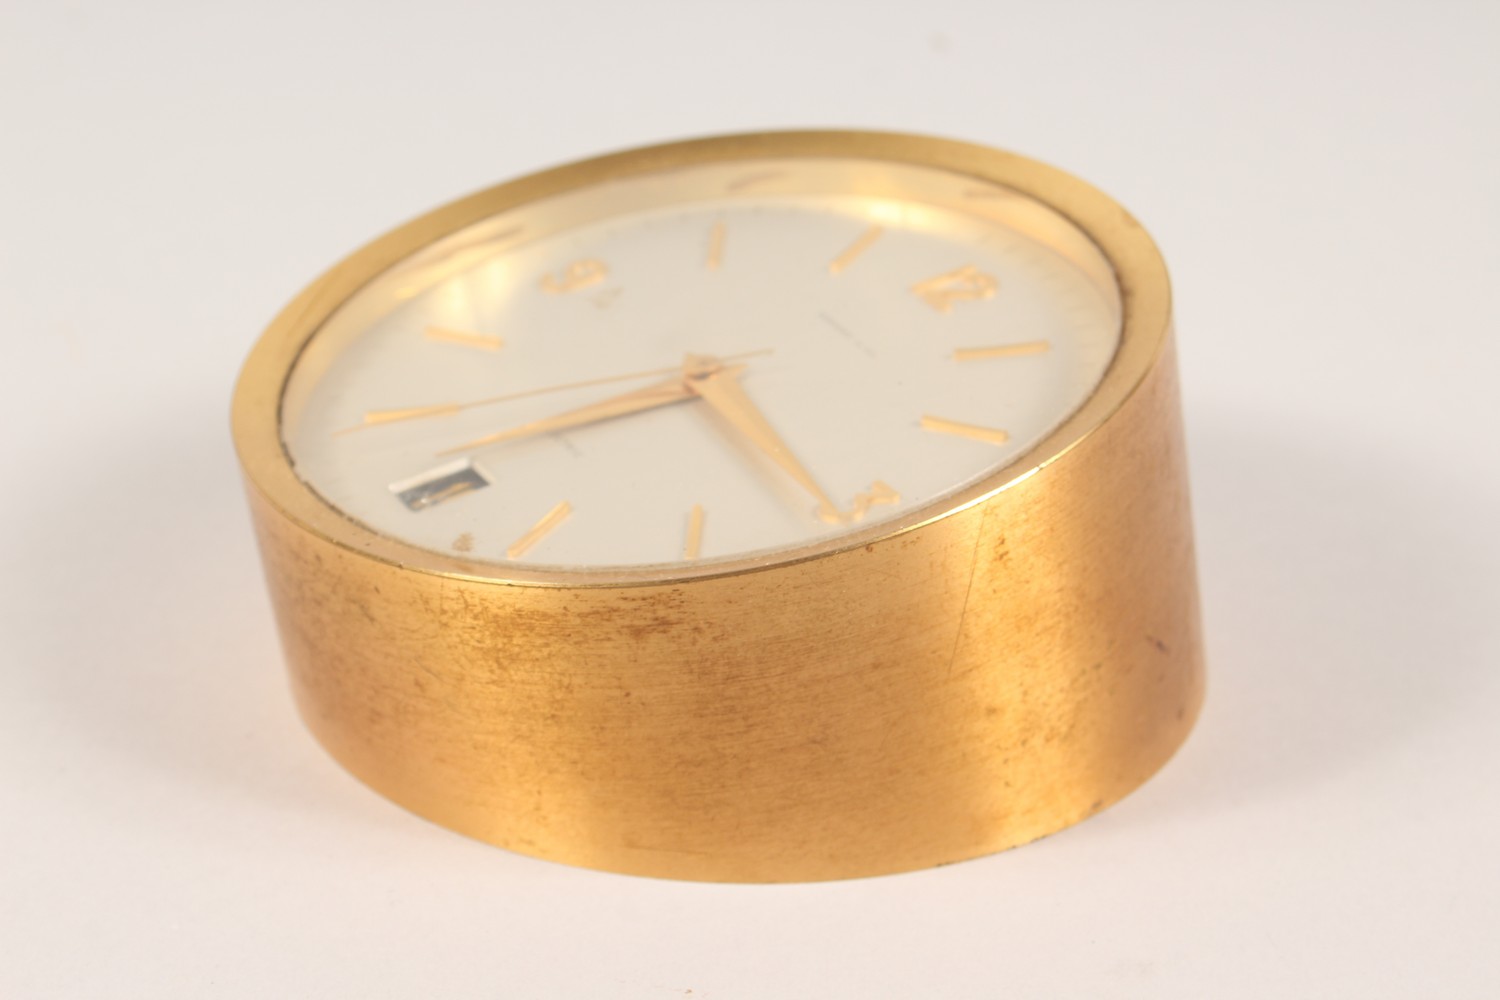 TIFFANY & CO., A BATTERY OPERATED CIRCULAR DESK CLOCK, with date aperture. 4.5ins diameter. - Image 3 of 6